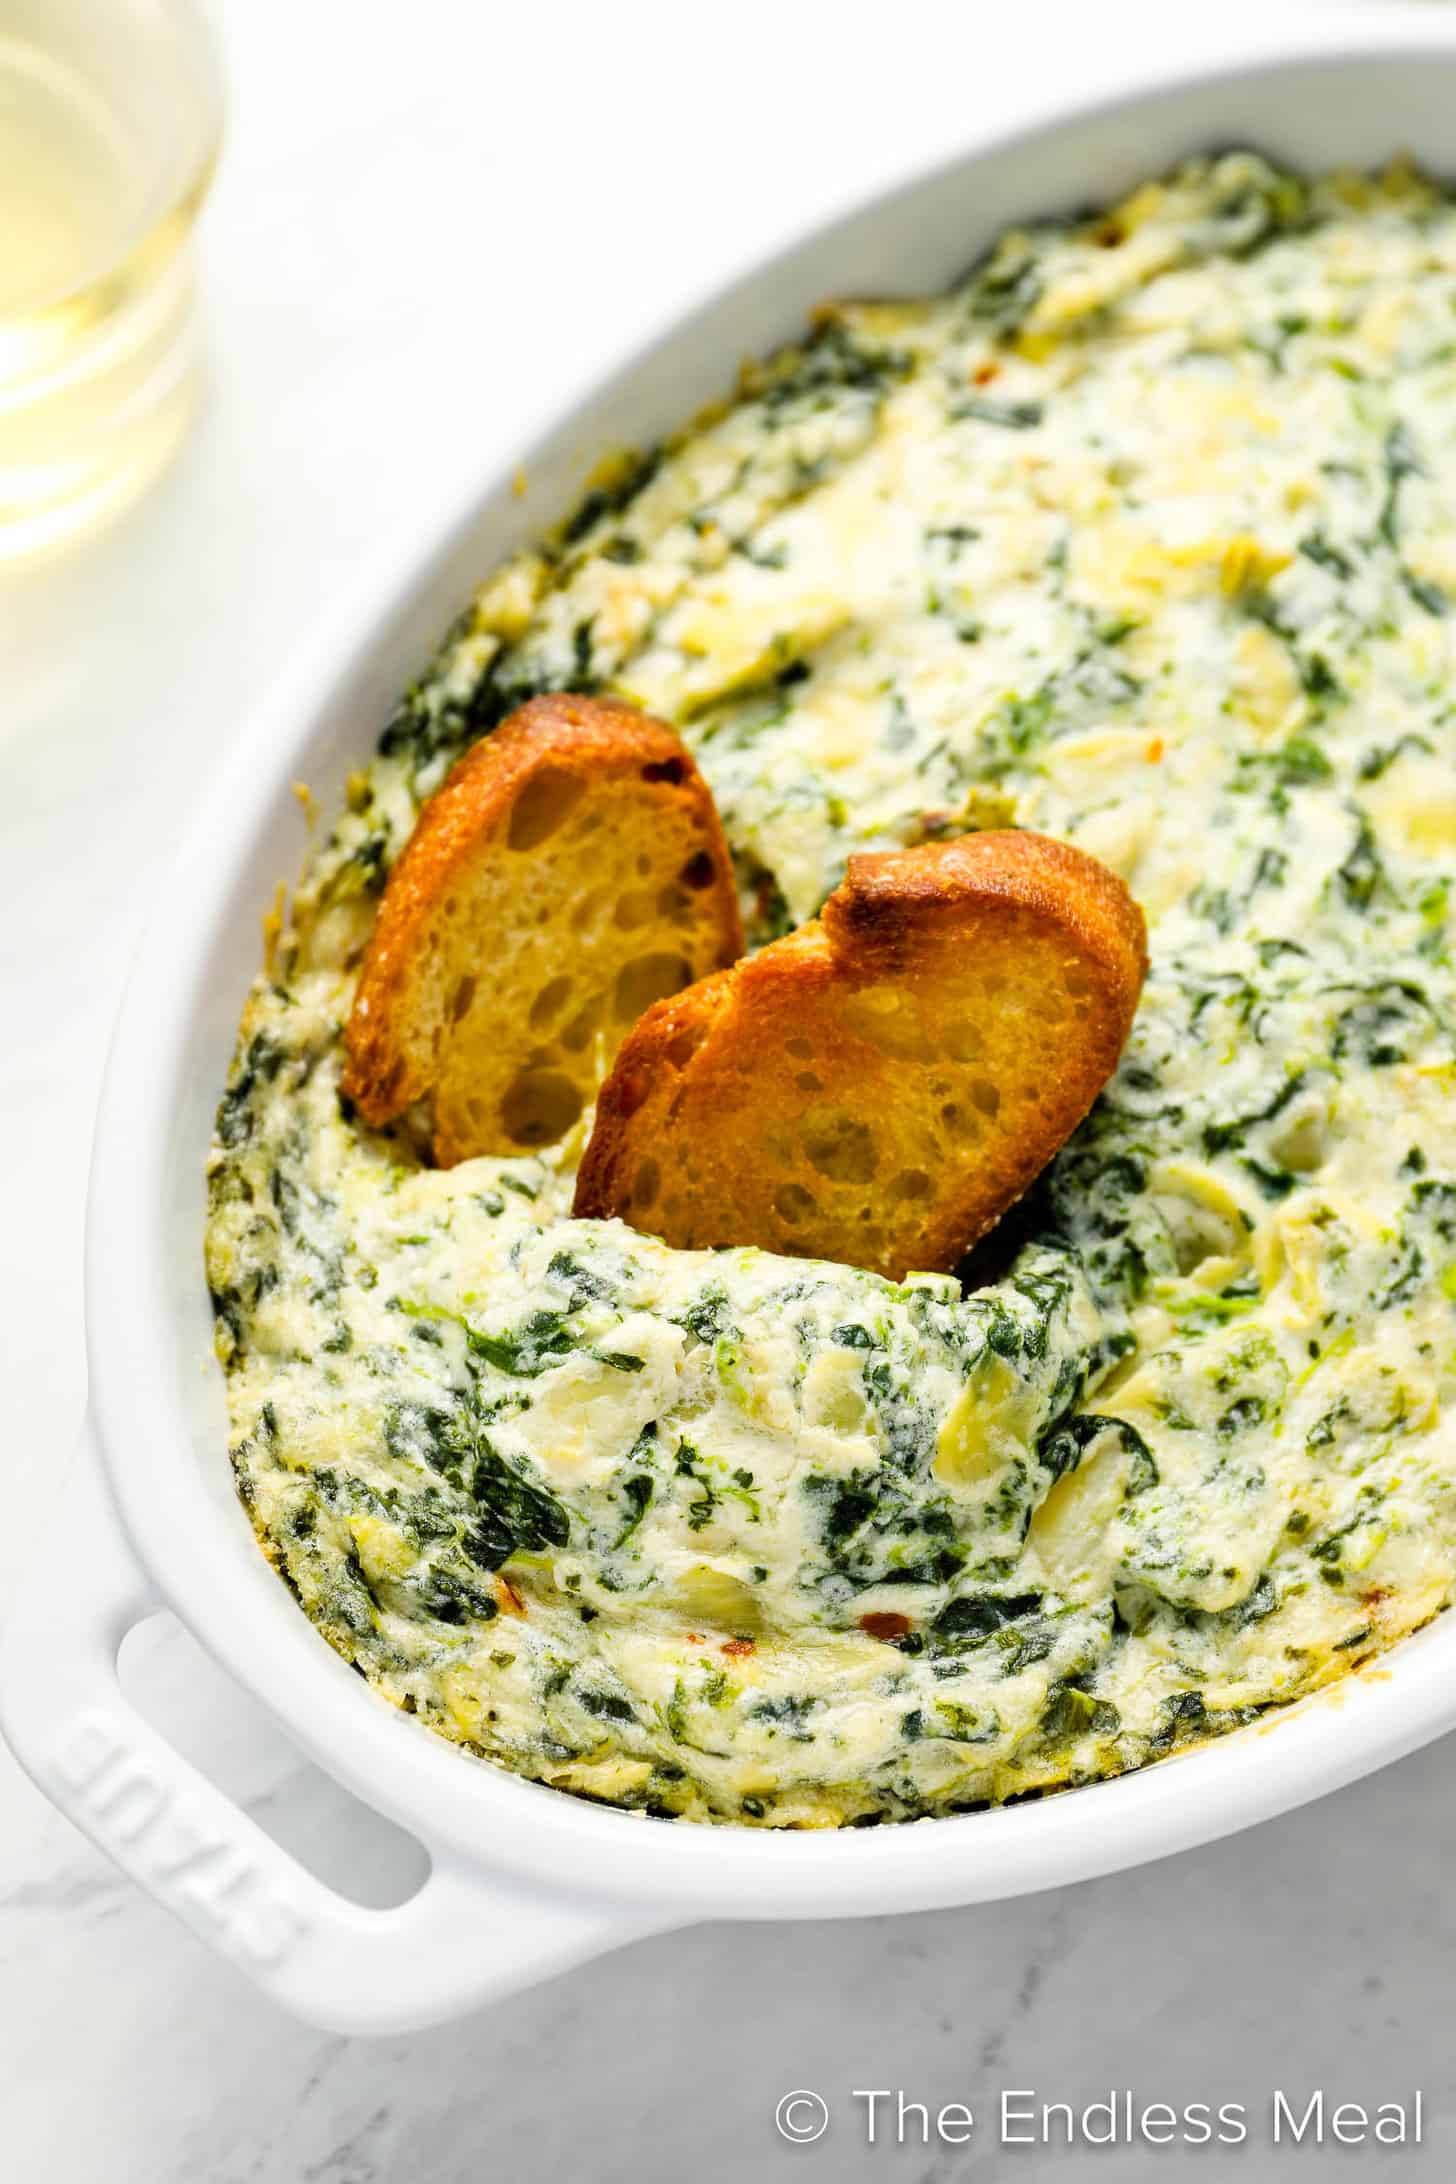 Two pieces of bread dipping into Hot Spinach Artichoke Dip